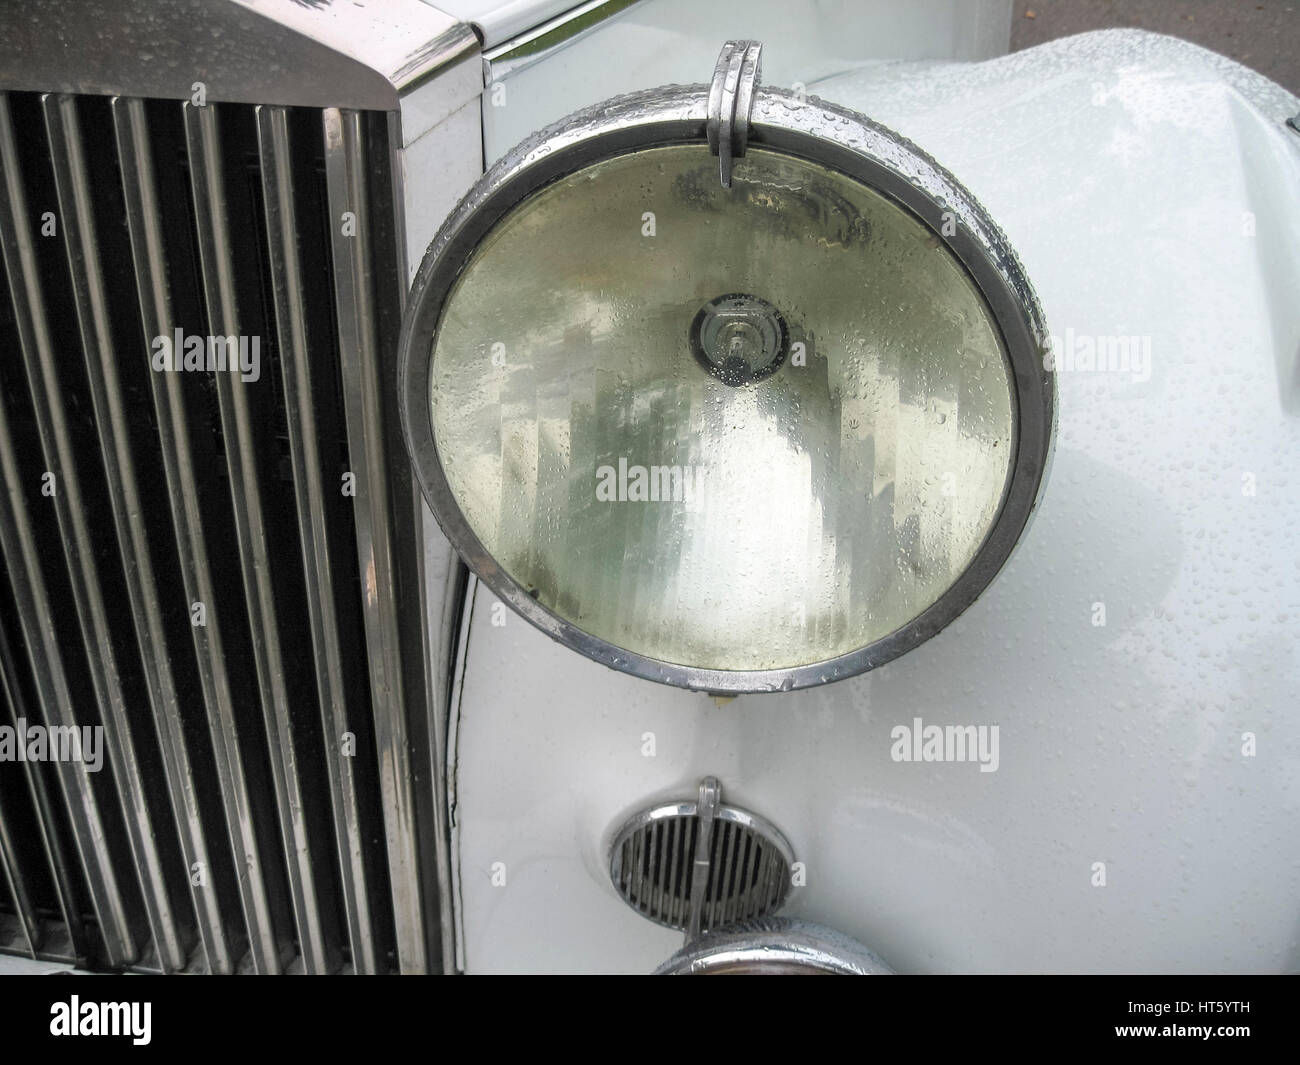 The headlight and part of the grille of a vintage 1954 Rolls Royce motorcar. Stock Photo